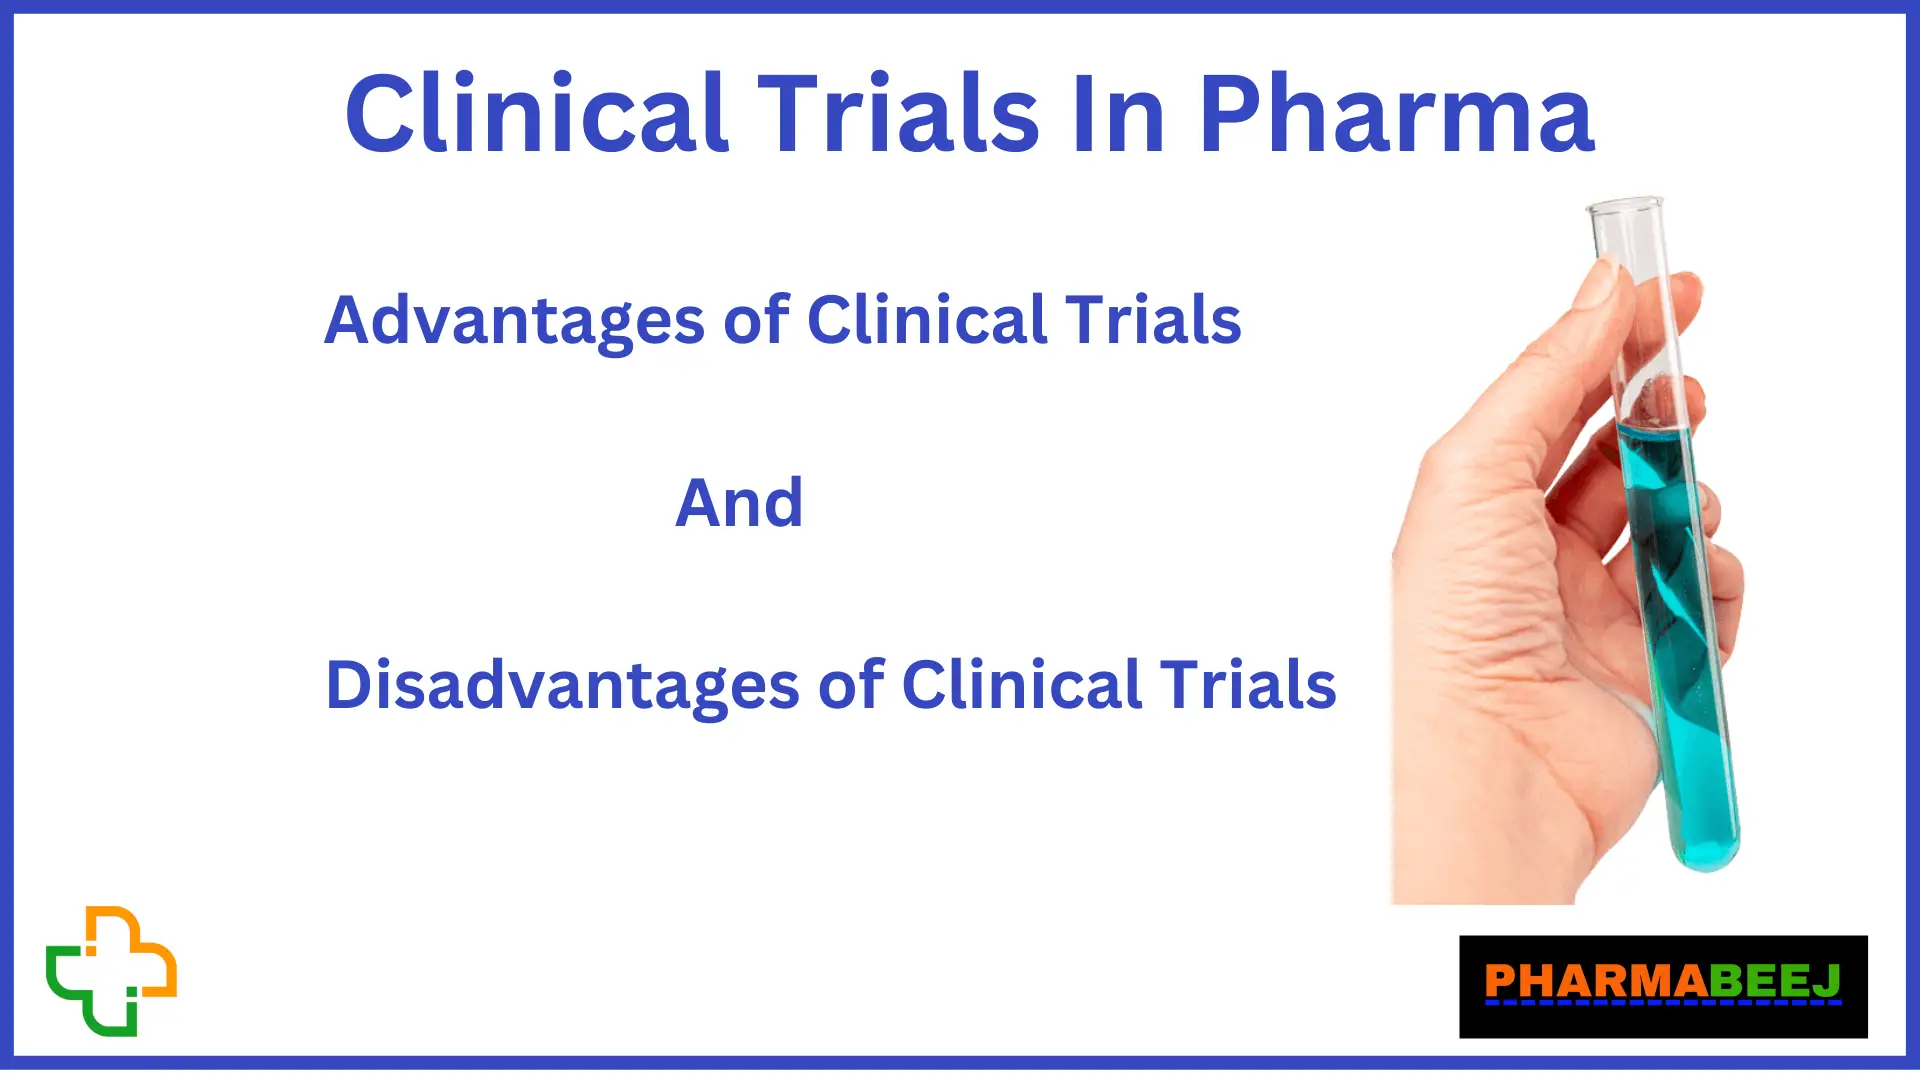 Advantages and disadvantages of clinical Trials